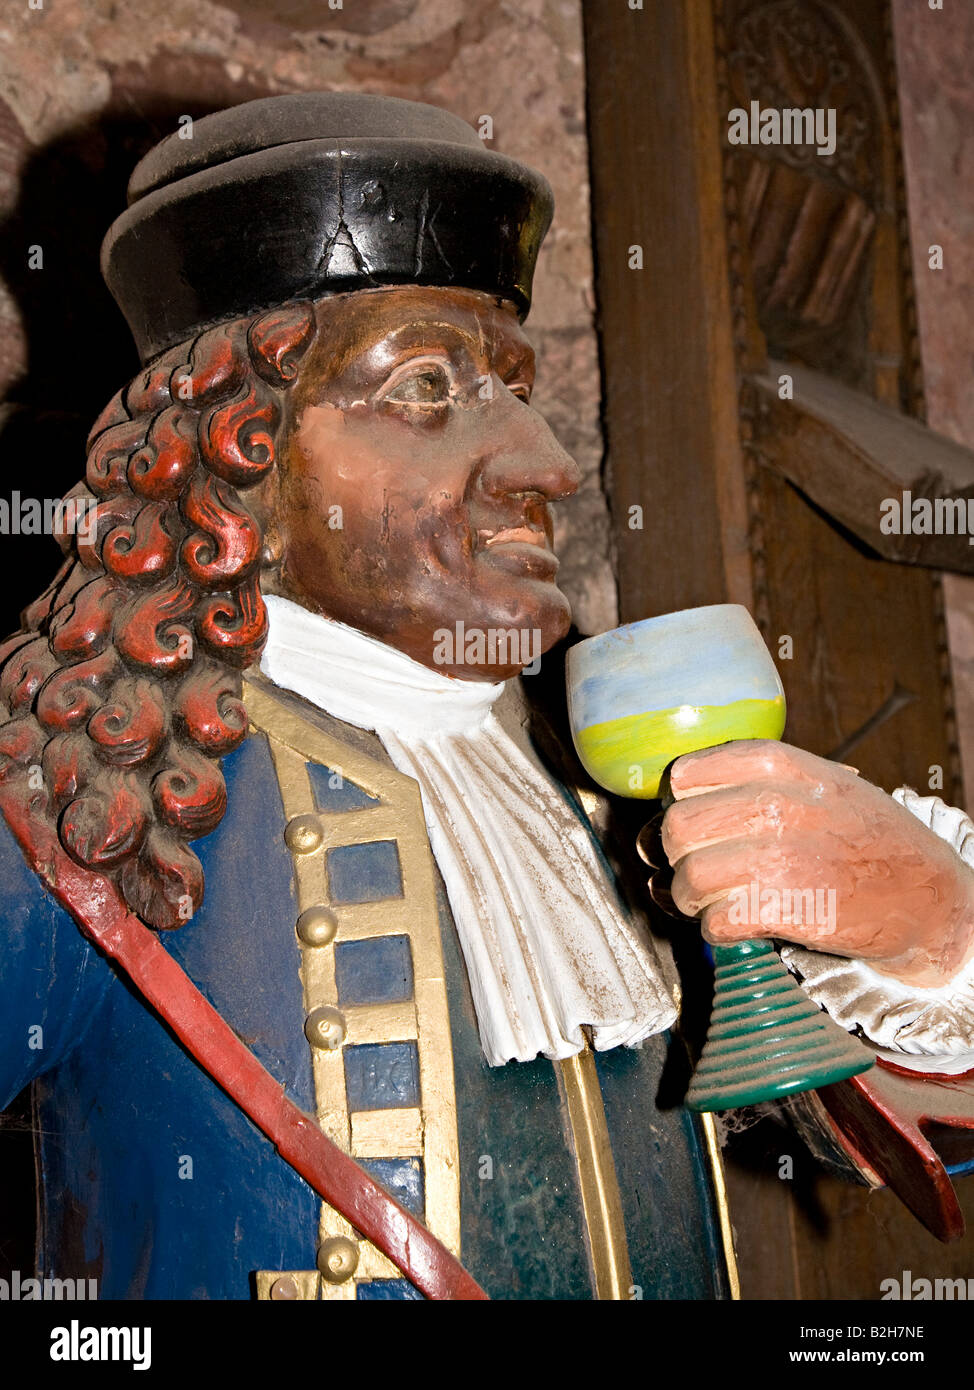 Carved and painted model of  Perkeo the cellarmaster and court jester Heidelberg castle (Heidelberger schloss) Germany Stock Photo